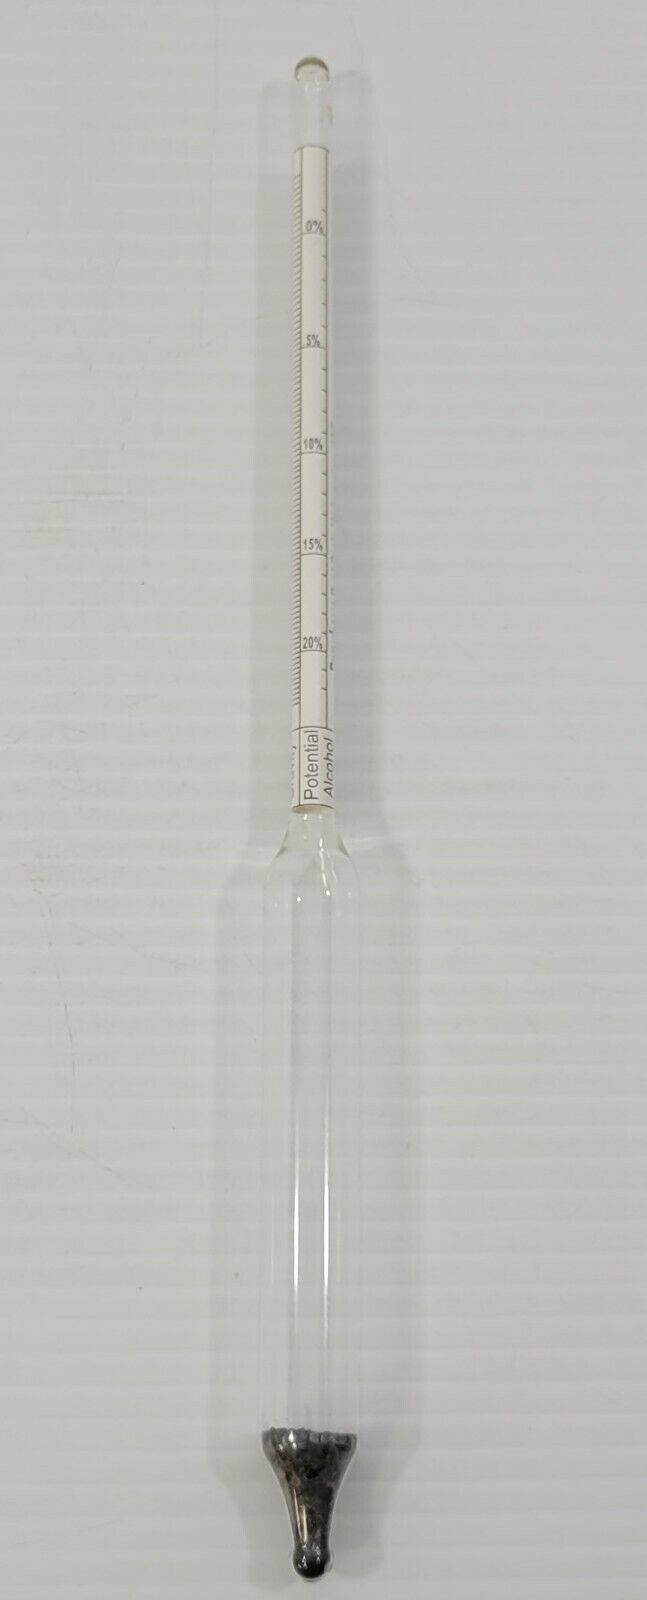 Primary image for 5M) Brewhaus Dual Scale Hydrometer Brewing